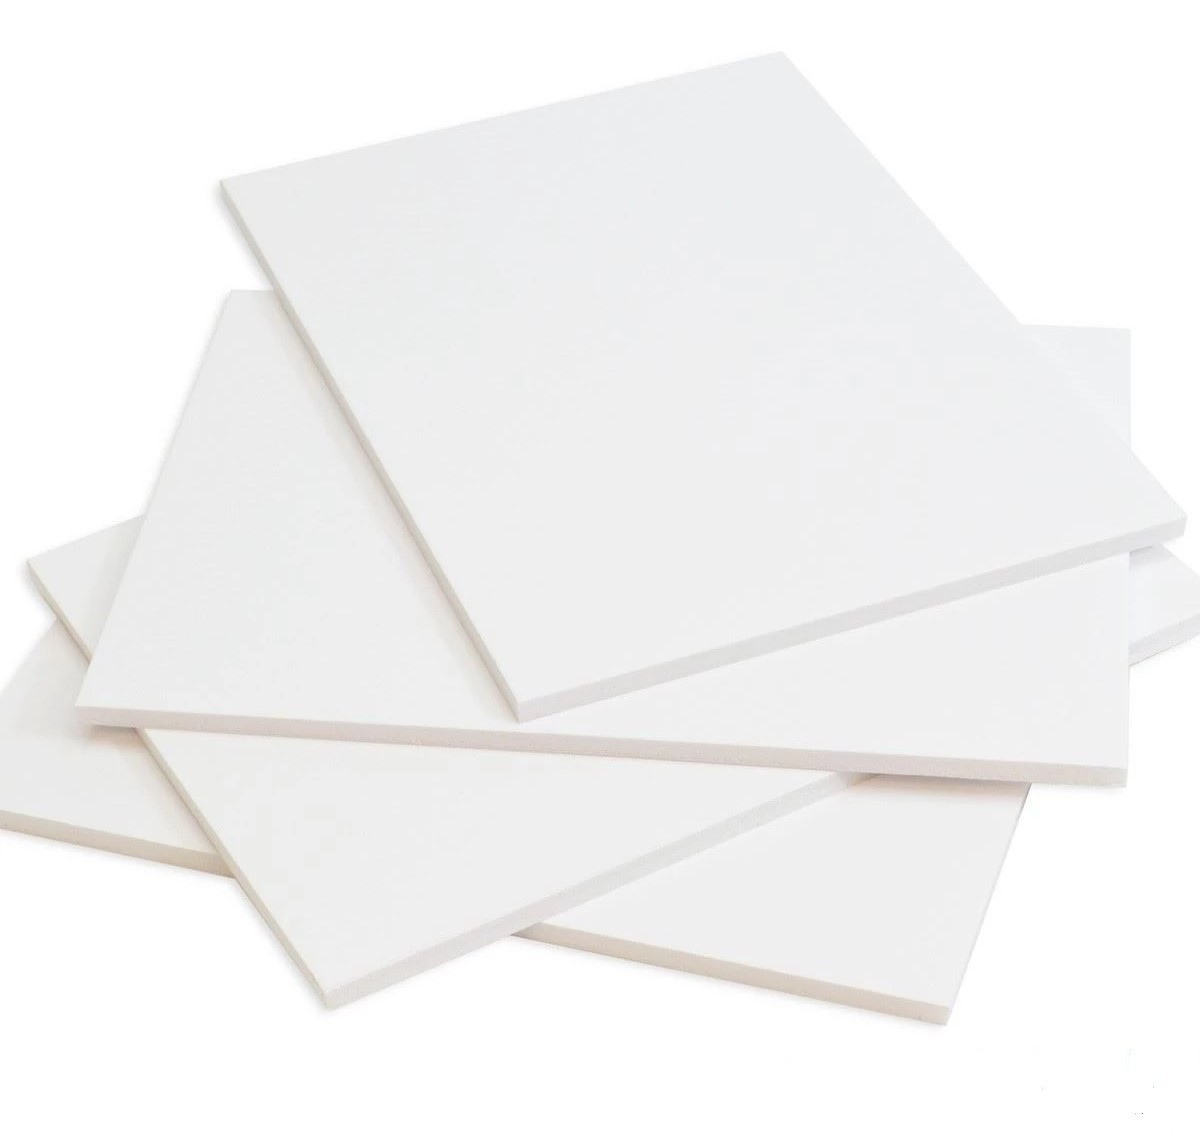 White 20 Sheets 5 mm Thick A4 Foam Board 